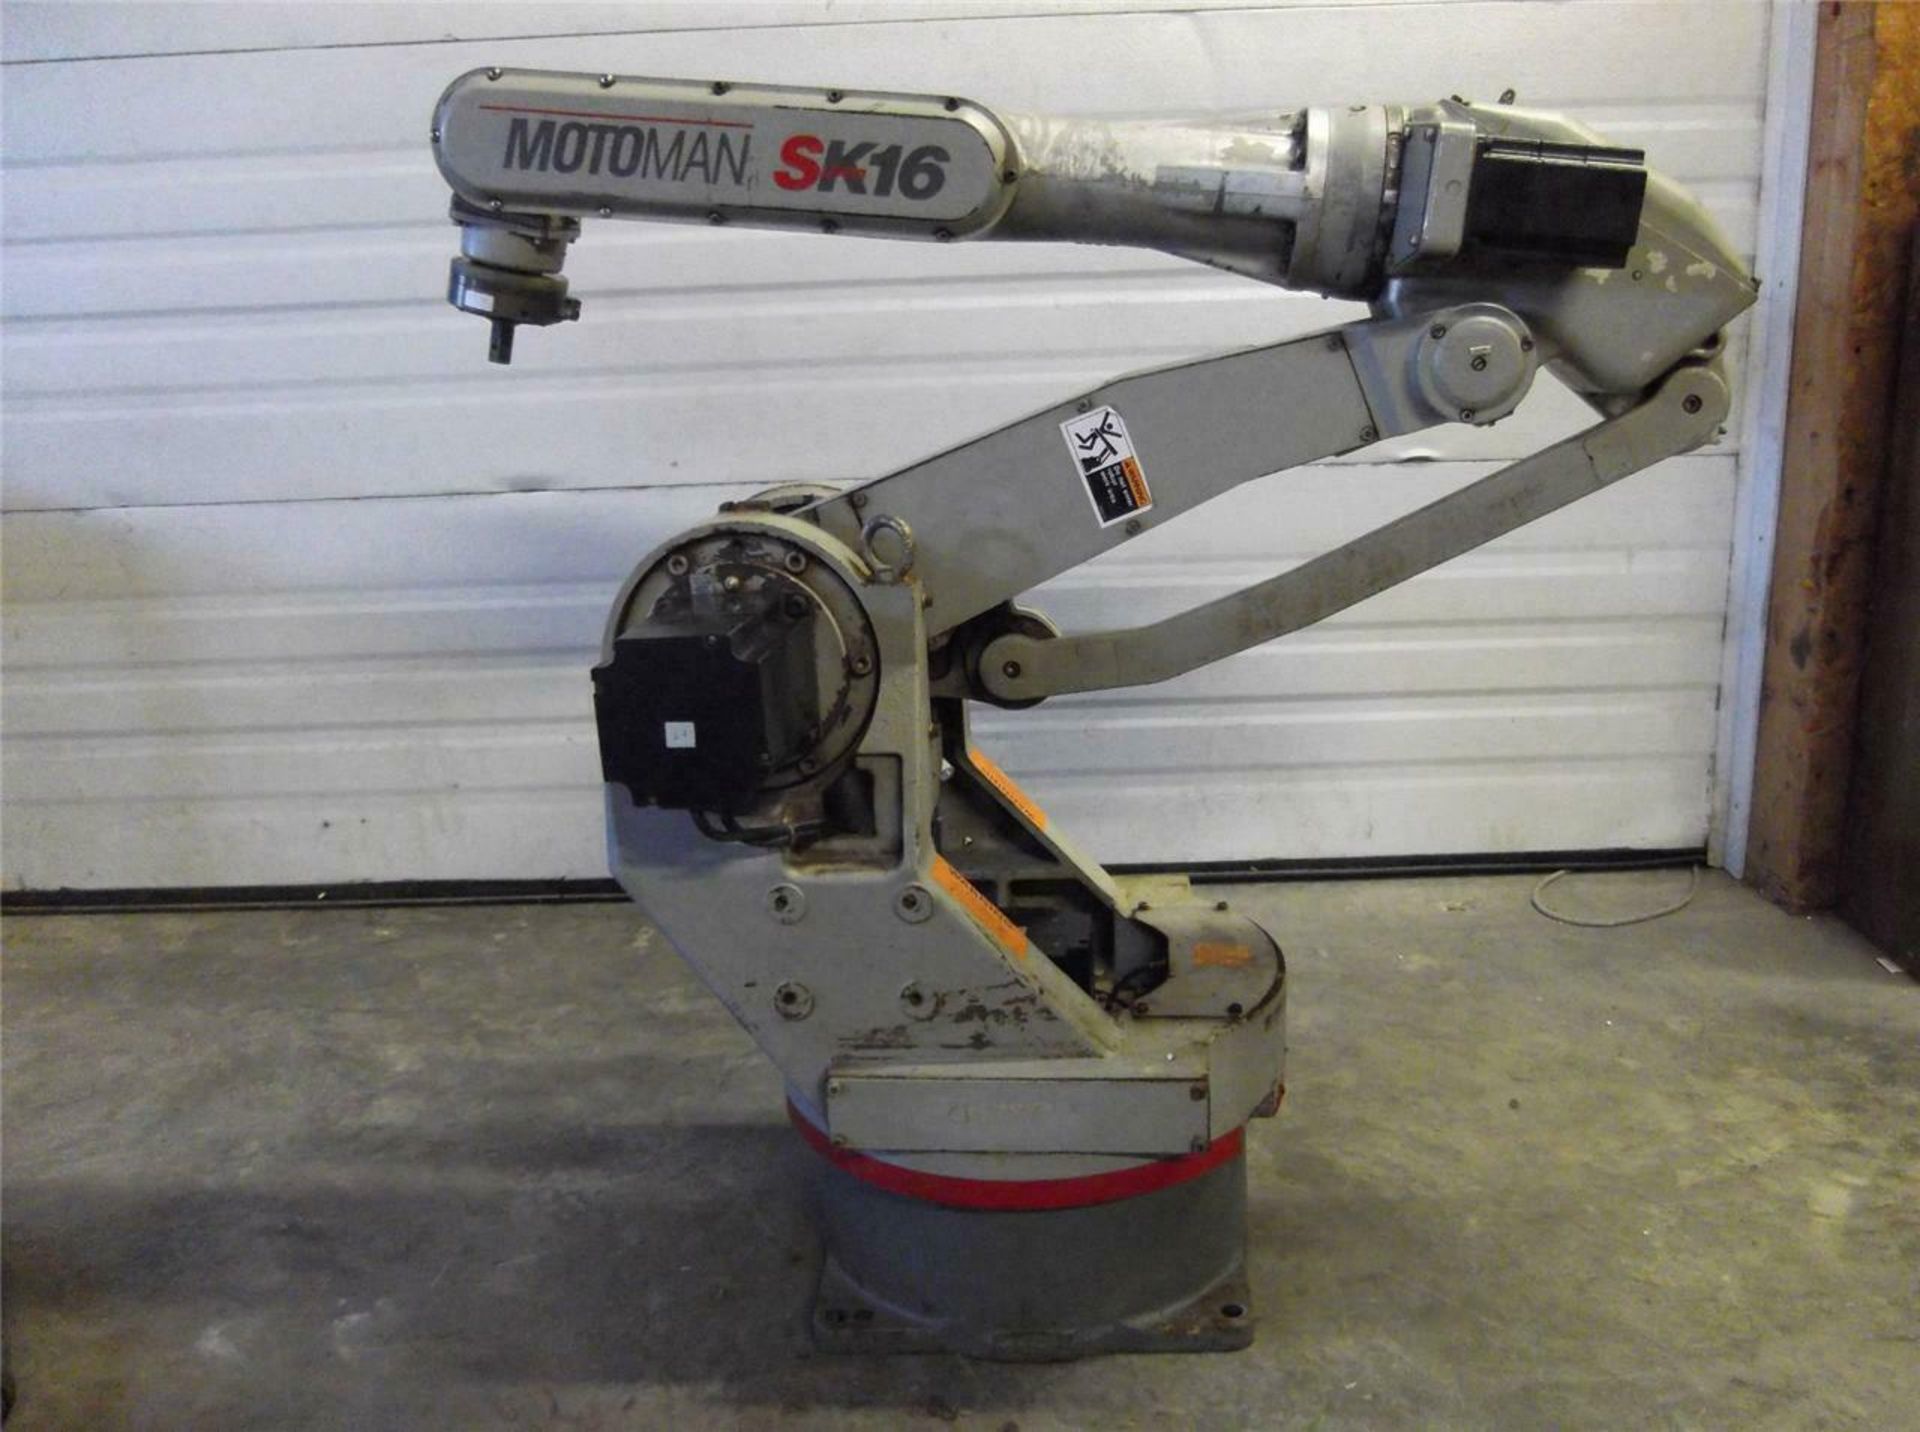 Motoman SK16 Robot, 6 Axis, 16 KG Payload, 1,555 mm Reach - Image 2 of 7